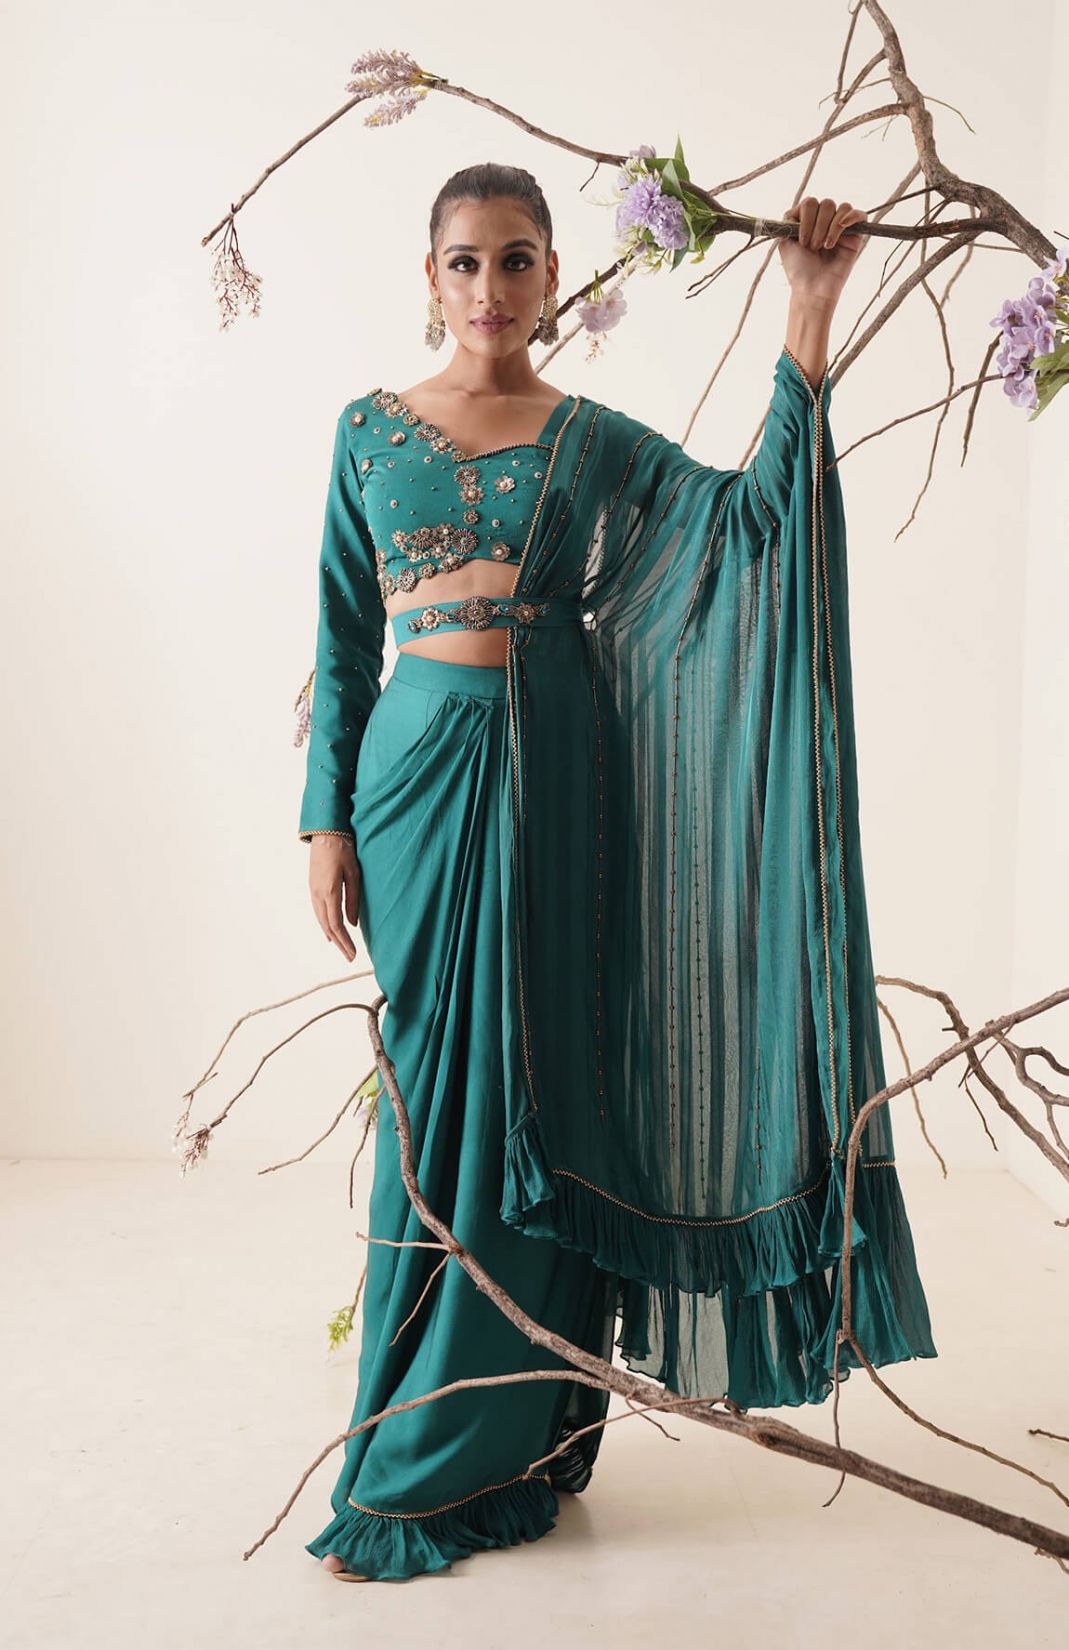 Teal Colour Pre-drape Saree With Waist Belt And Pallu Comes In A Full Sleeve Style.